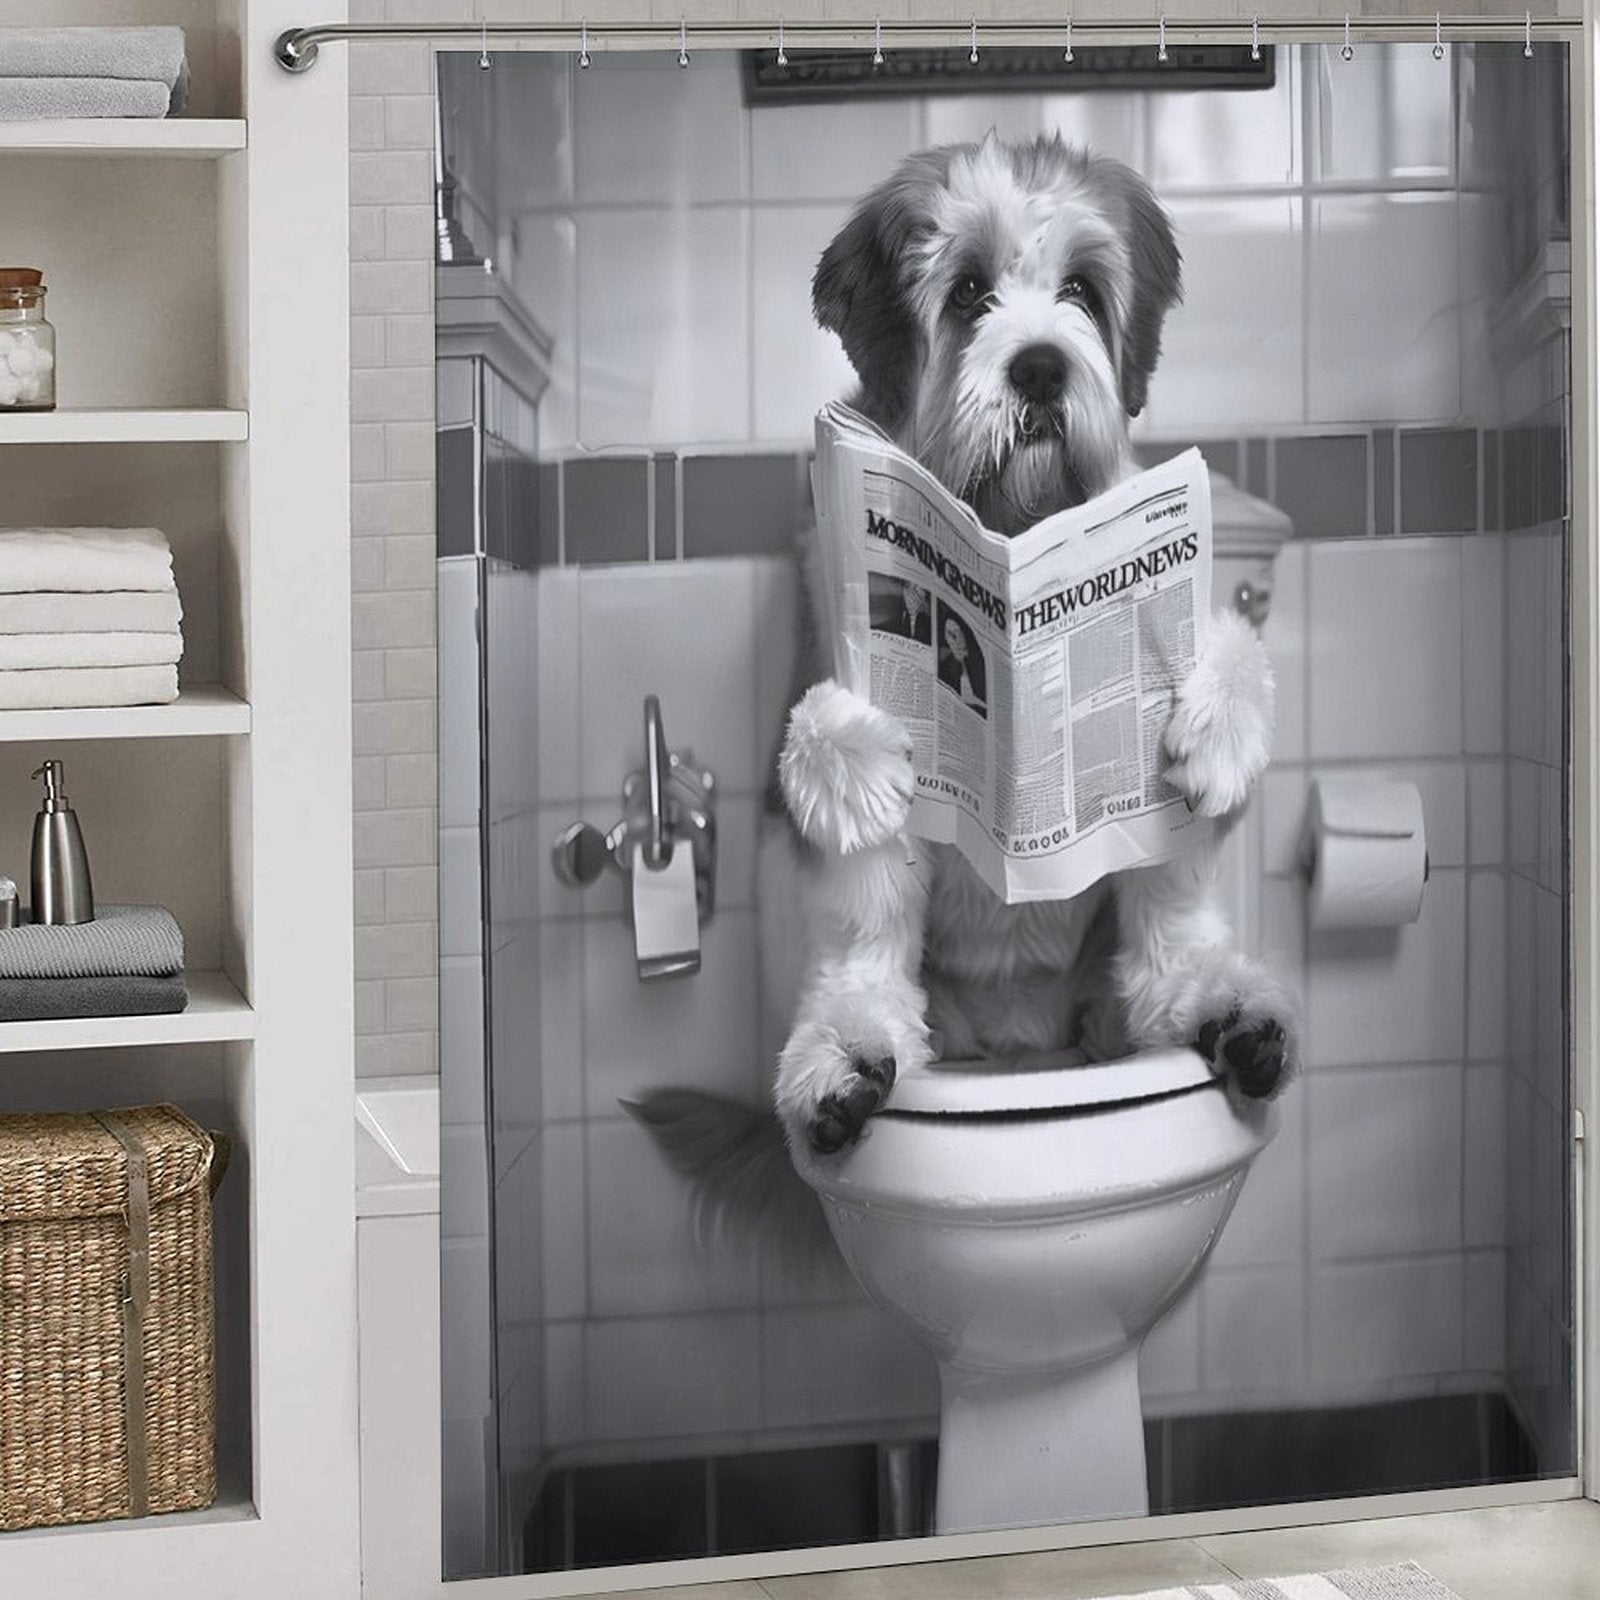 A black and white, waterproof shower curtain depicts a humorous scene: a dog sitting on a toilet reading a newspaper in the bathroom. Shelves with towels and baskets are visible on the left side. This Black and White Funny Read Book Dog Shower Curtain-Cottoncat adds a playful touch to any bathroom decor by Cotton Cat.